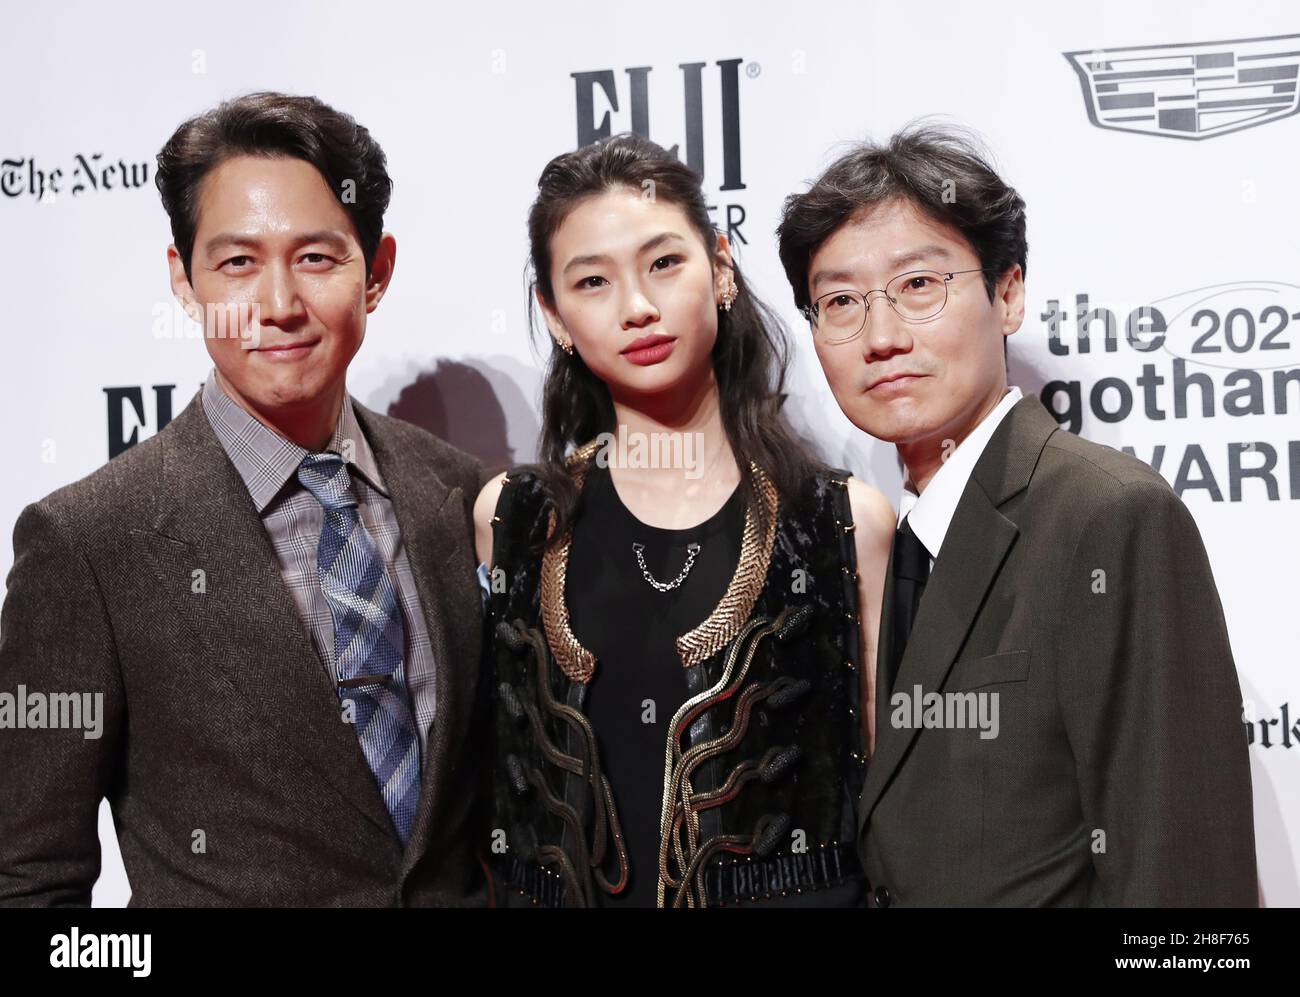 New York, United States. 29th Nov, 2021. Lee Jung-jae, Jung Ho-yeon and Hwang Dong-hyuk arrive on the red carpet at the 2021 Gotham Awards presented by The Gotham Film & Media Institute at Cipriani Wall Street in New York City on Monday, November 29, 2021. Photo by John Angelillo/UPI Credit: UPI/Alamy Live News Stock Photo